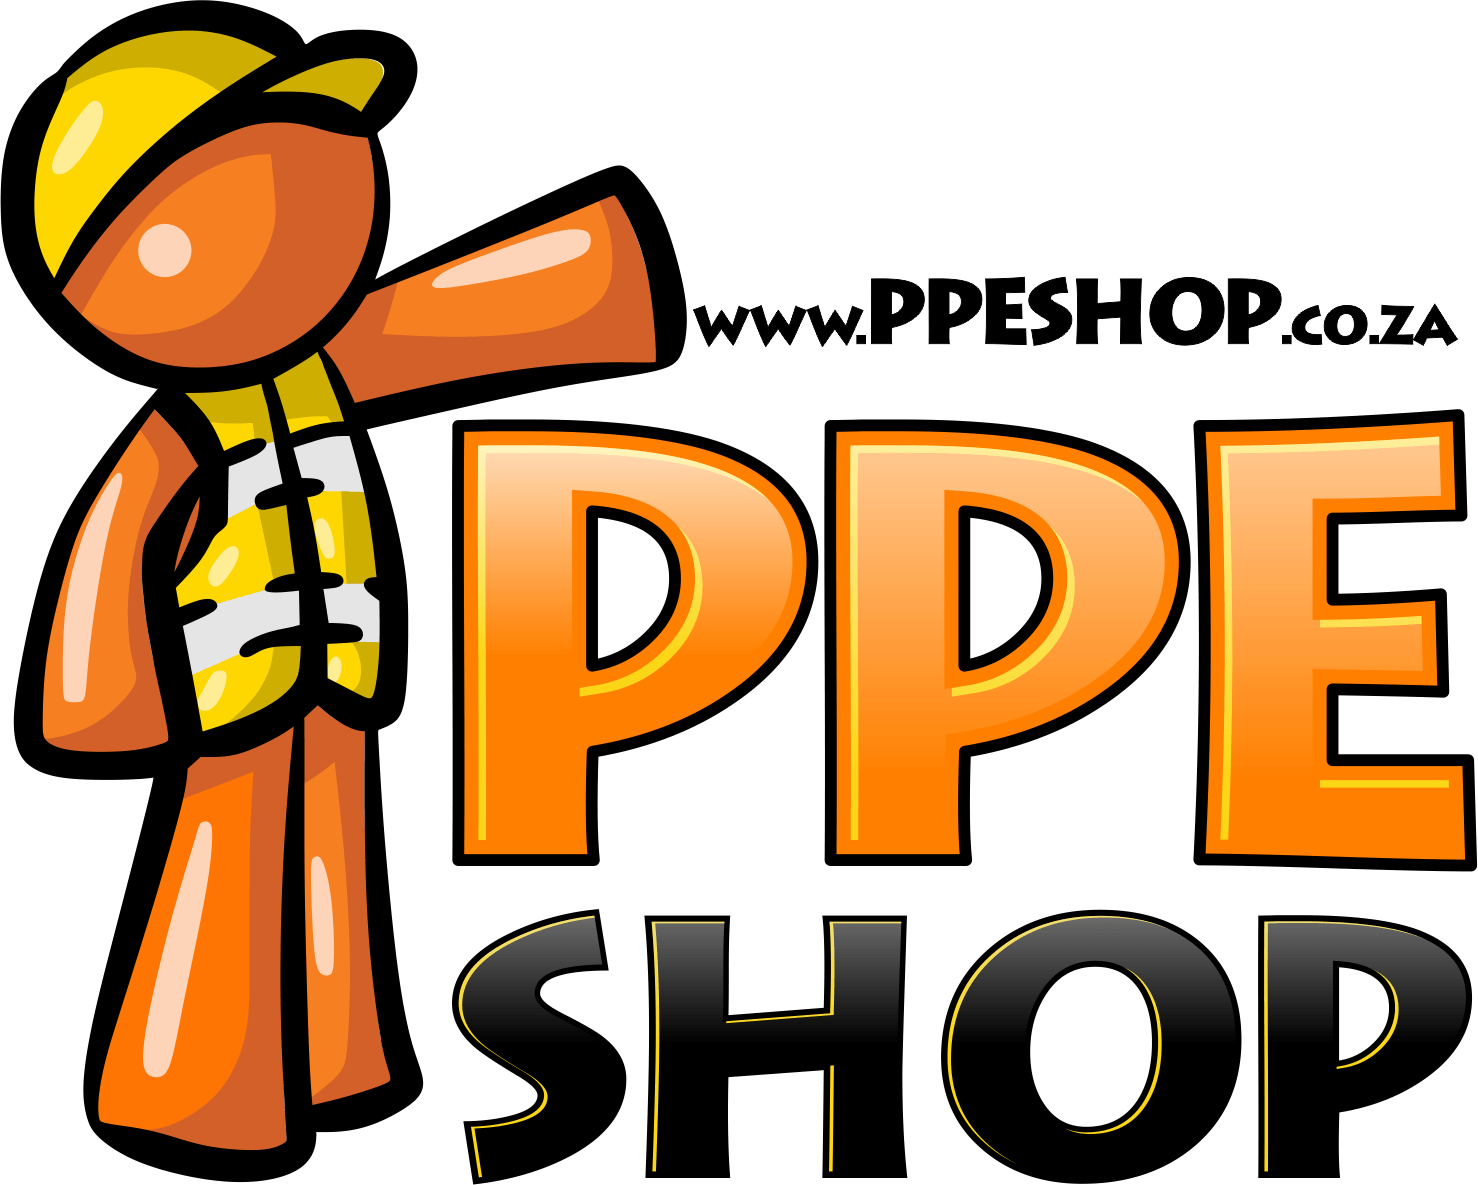 PPE Logo - PPE Shop Safety Wear & Equipment, Occupational Health and Safety ...